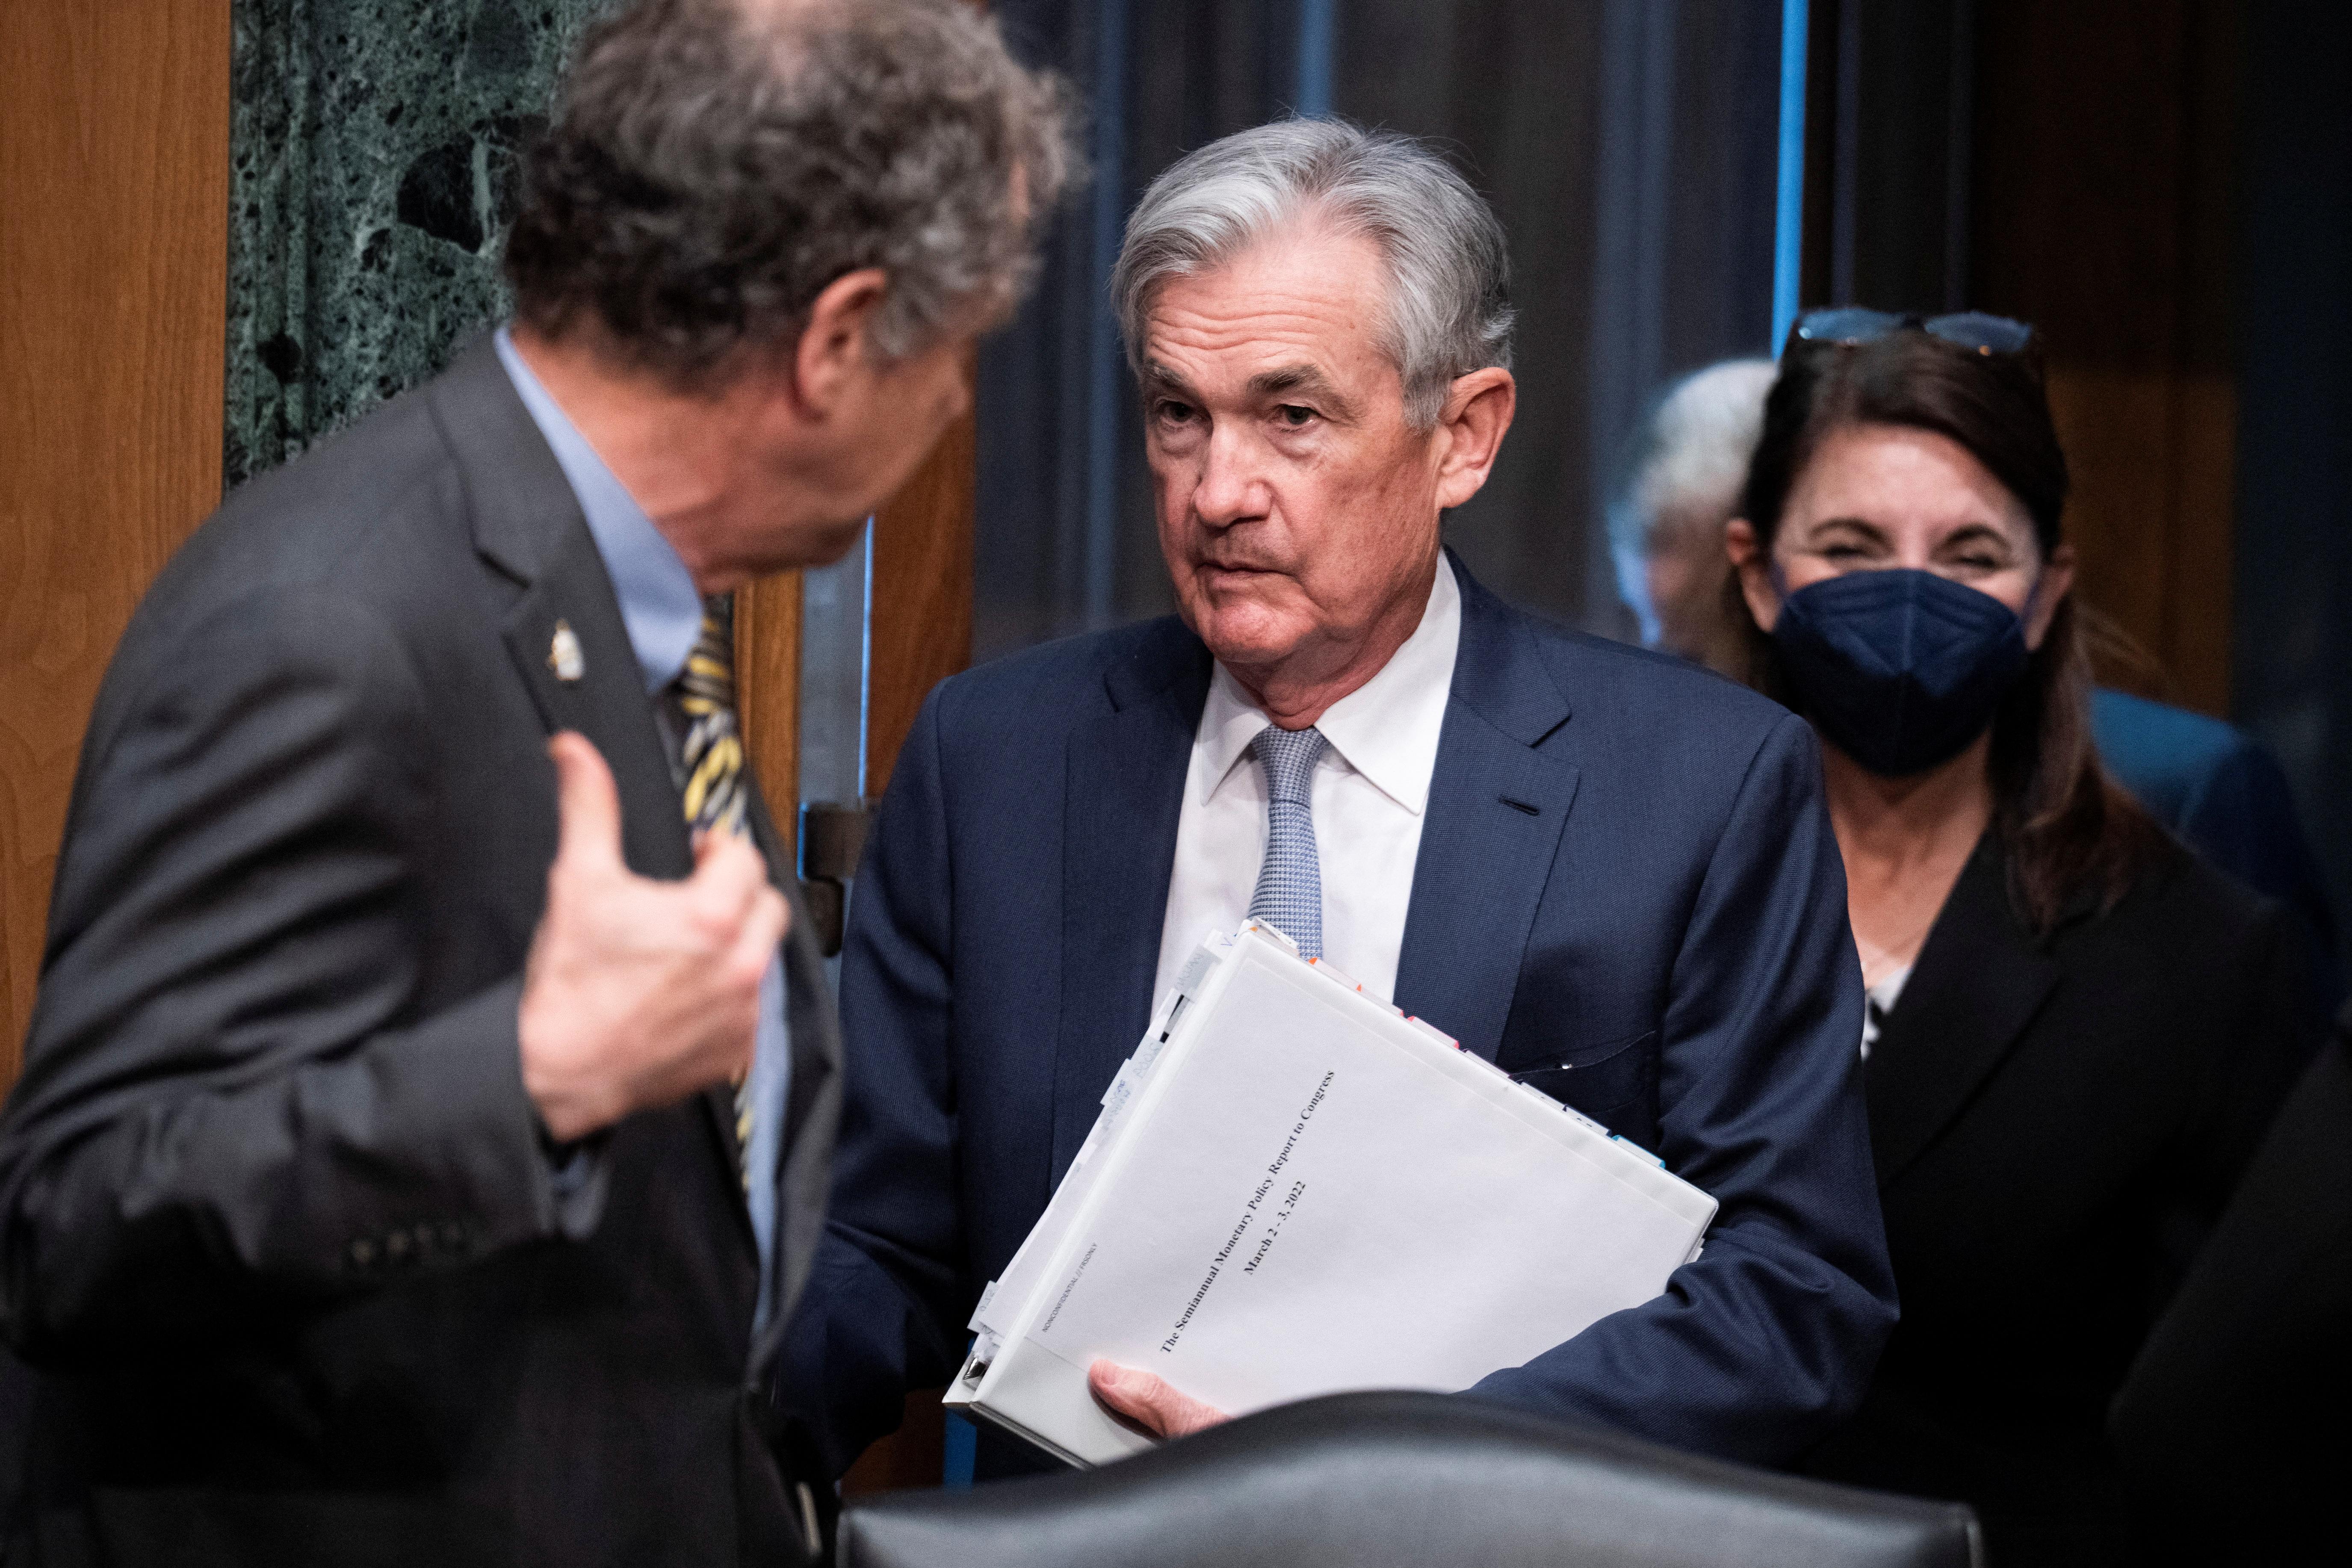 Federal Reserve Chairman Jerome Powell and Sherrod Brown (D-OH) arrive to testify before the Senate Banking Committee, in Washington, D.C.